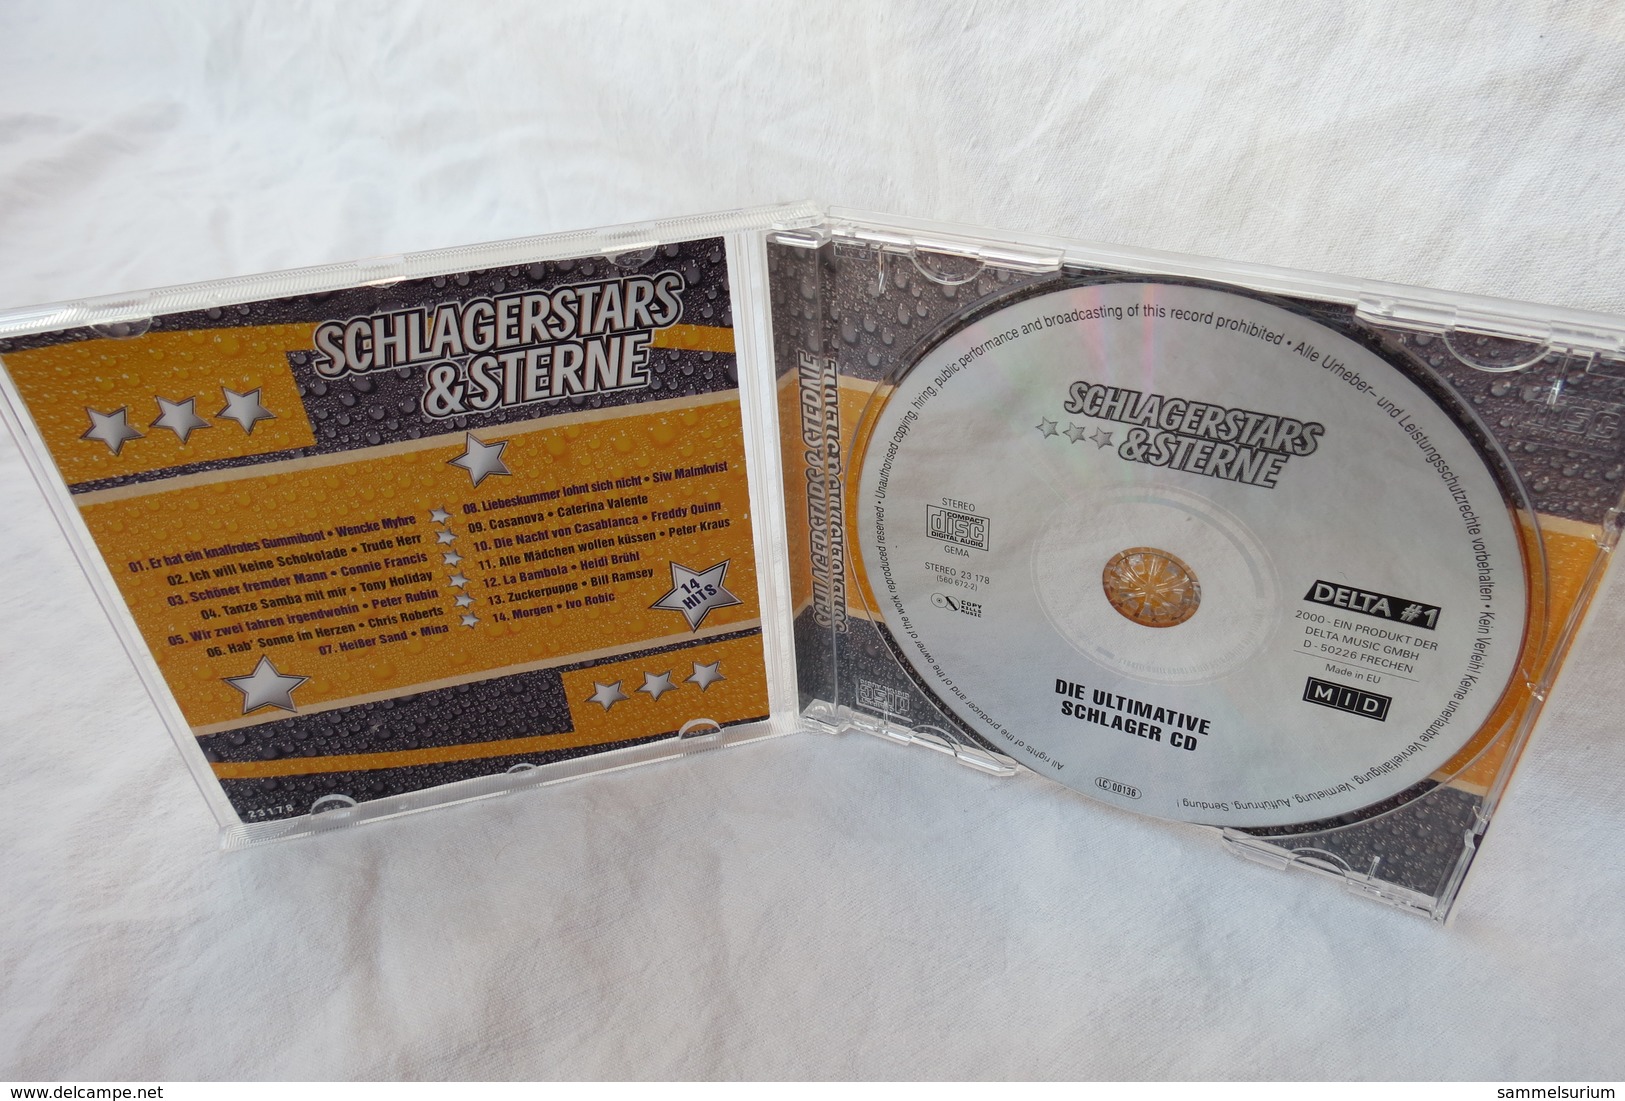 CD "Schlagerstars & Sterne" 14 Hits, Die Ultimative Schlager CD - Hit-Compilations